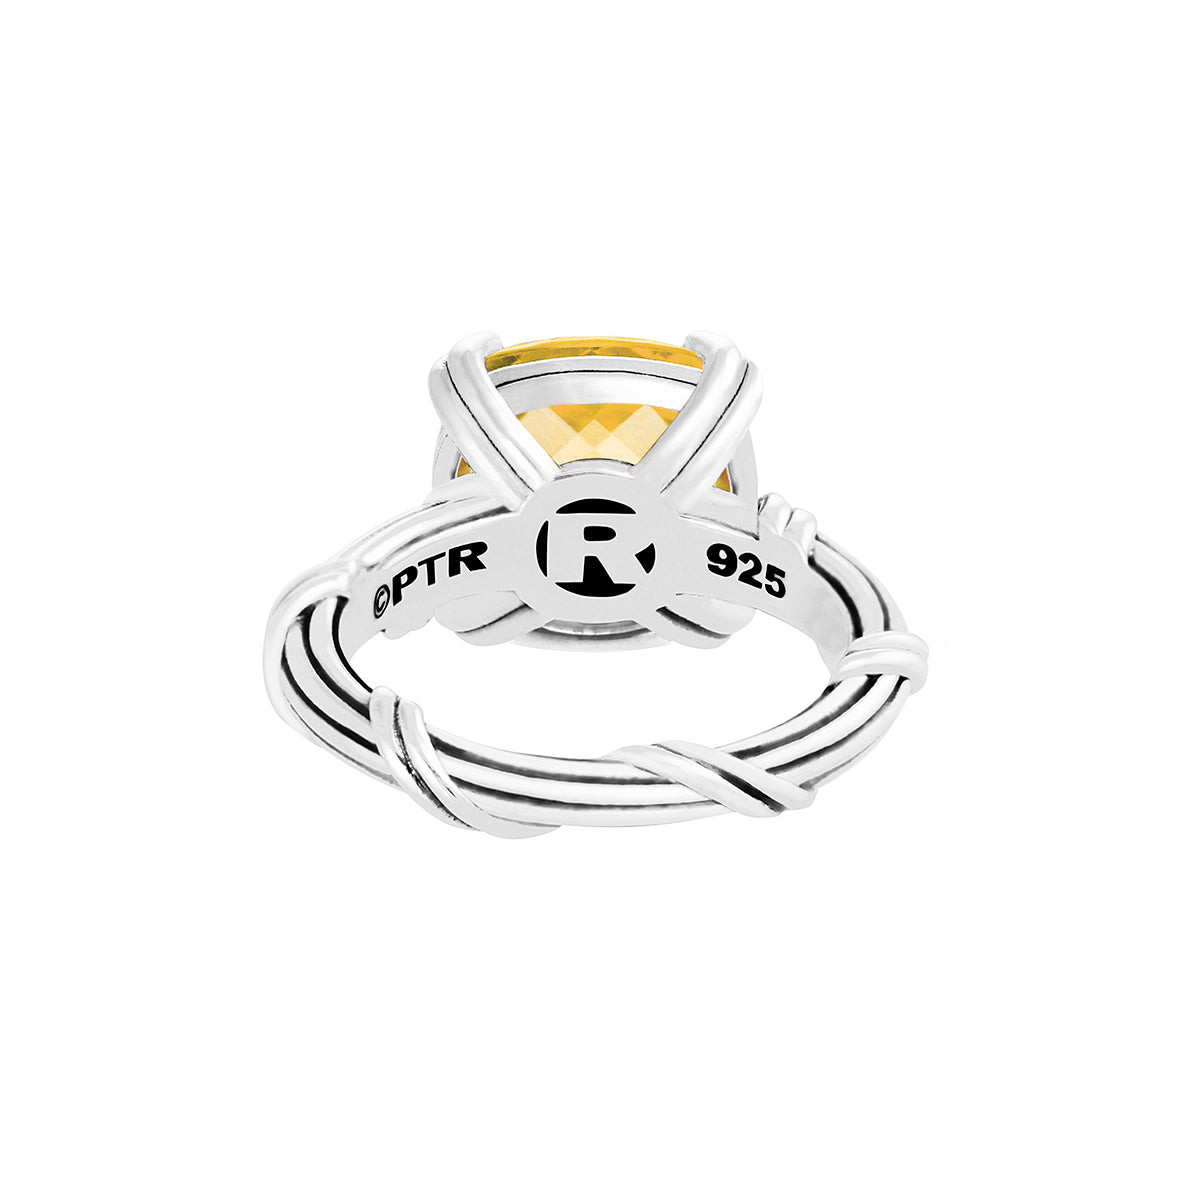 Fantasies Citrine Cocktail Ring in sterling silver